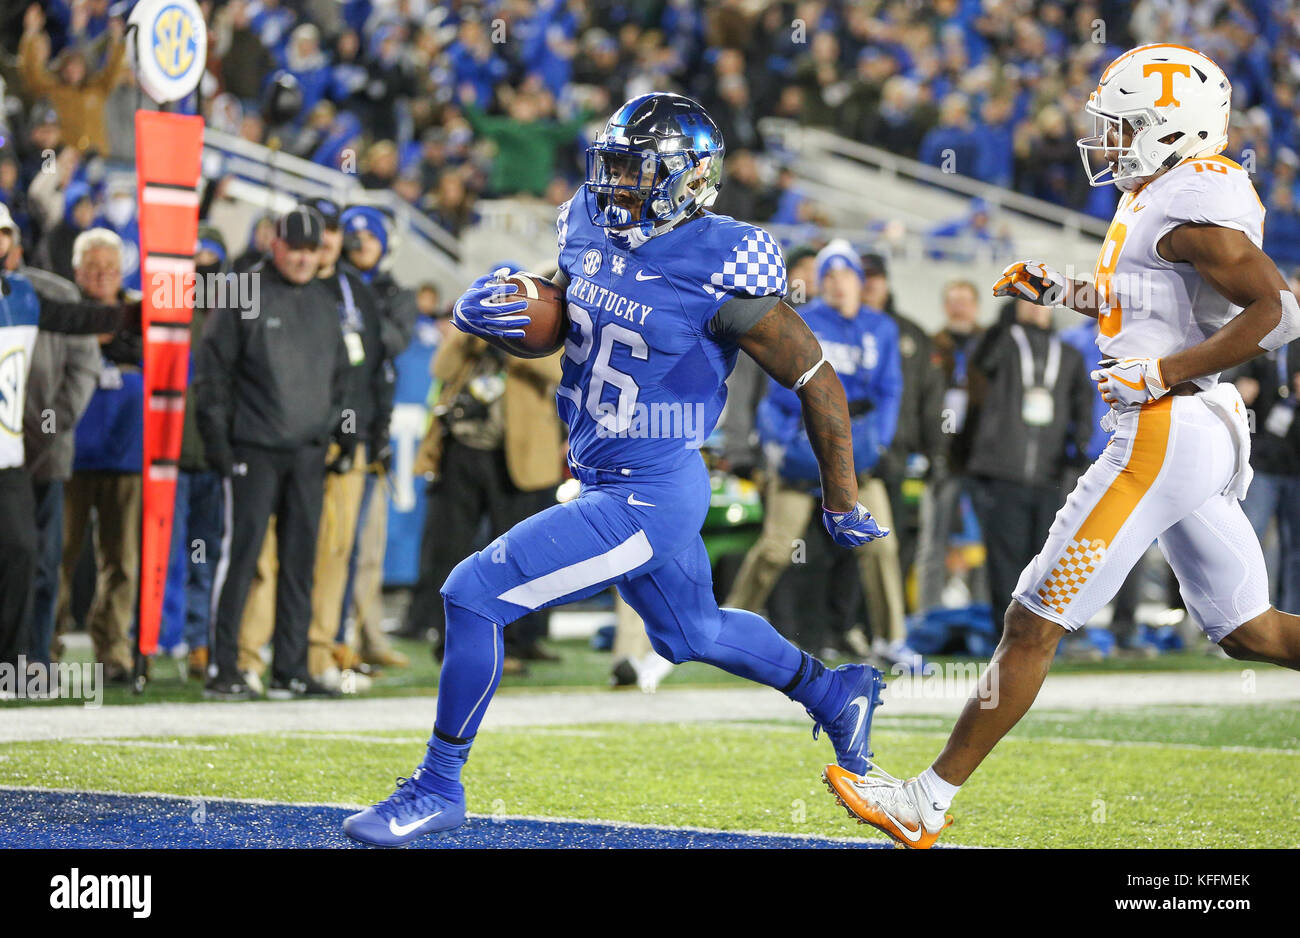 Lexington, KY, USA. 28th Oct, 2017. Kentucky's Benny Snell Jr. #26 crosses the goal line to score the first touchdown of the game during the NCAA football game between the Tennessee Volunteers and the Kentucky Wildcats at Kroger Field in Lexington, KY. Kyle Okita/CSM/Alamy Live News Stock Photo